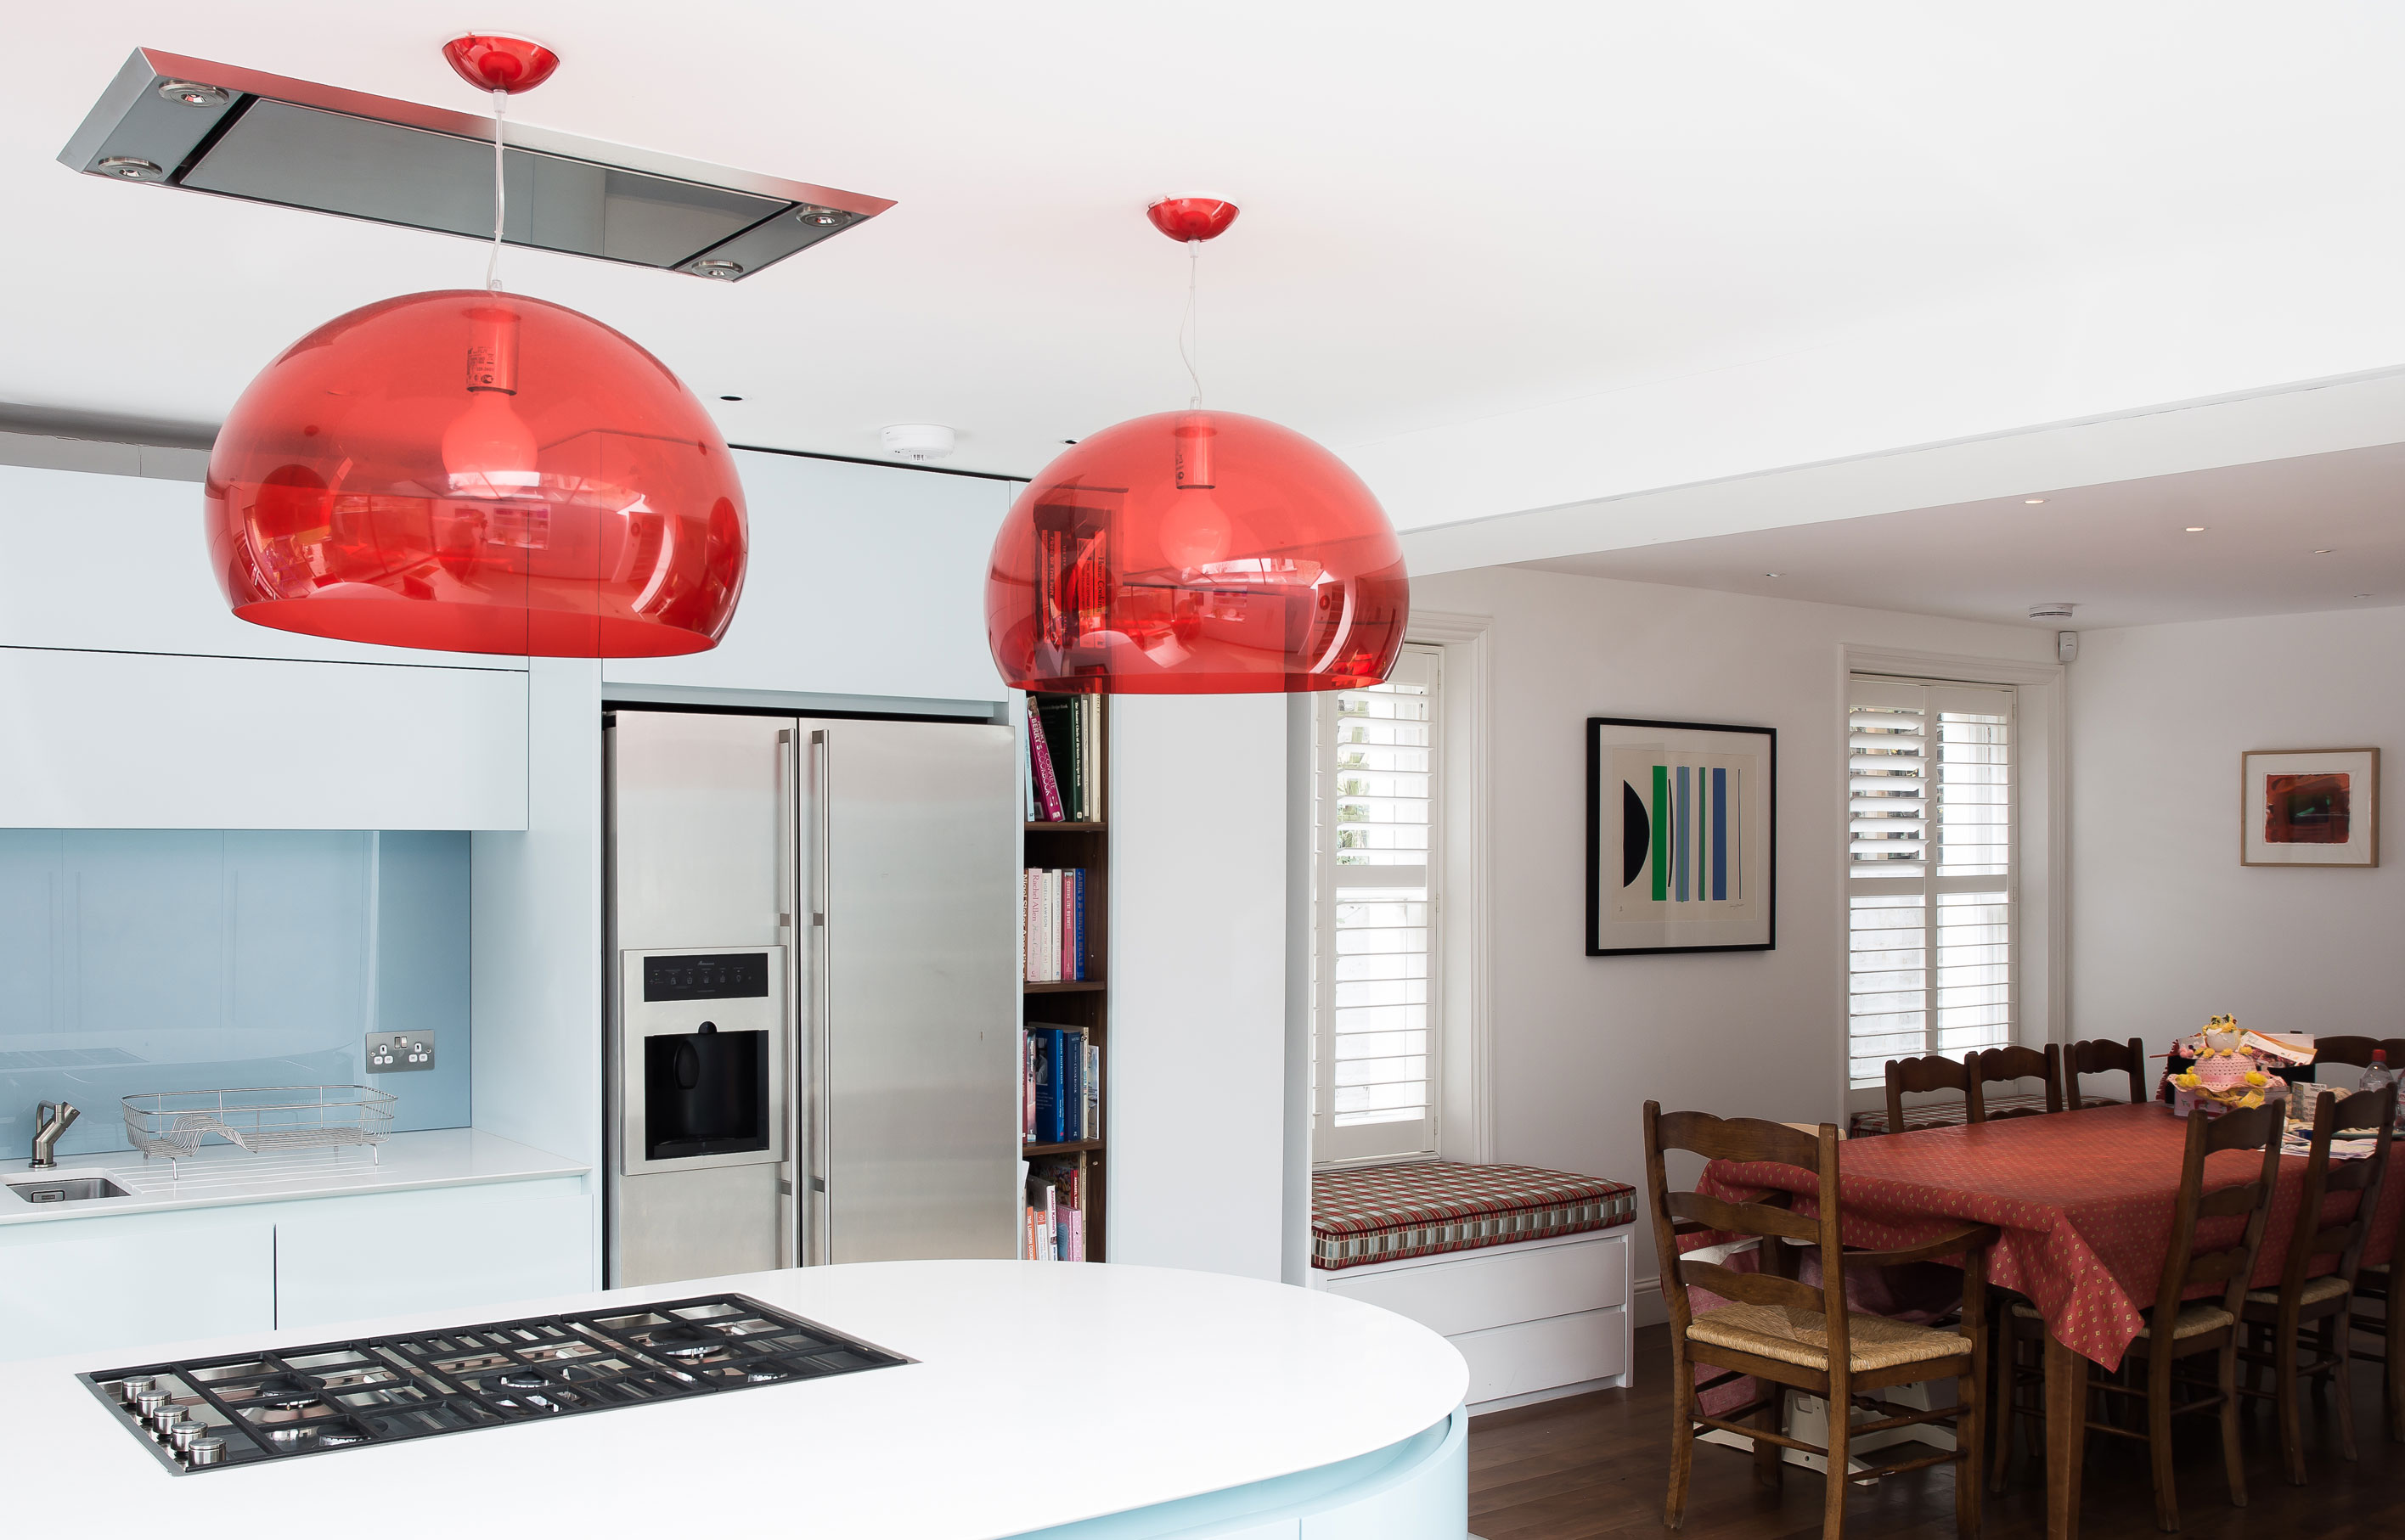 Aldworth James & Bond | Kitchen joinery for a Maida Vale home